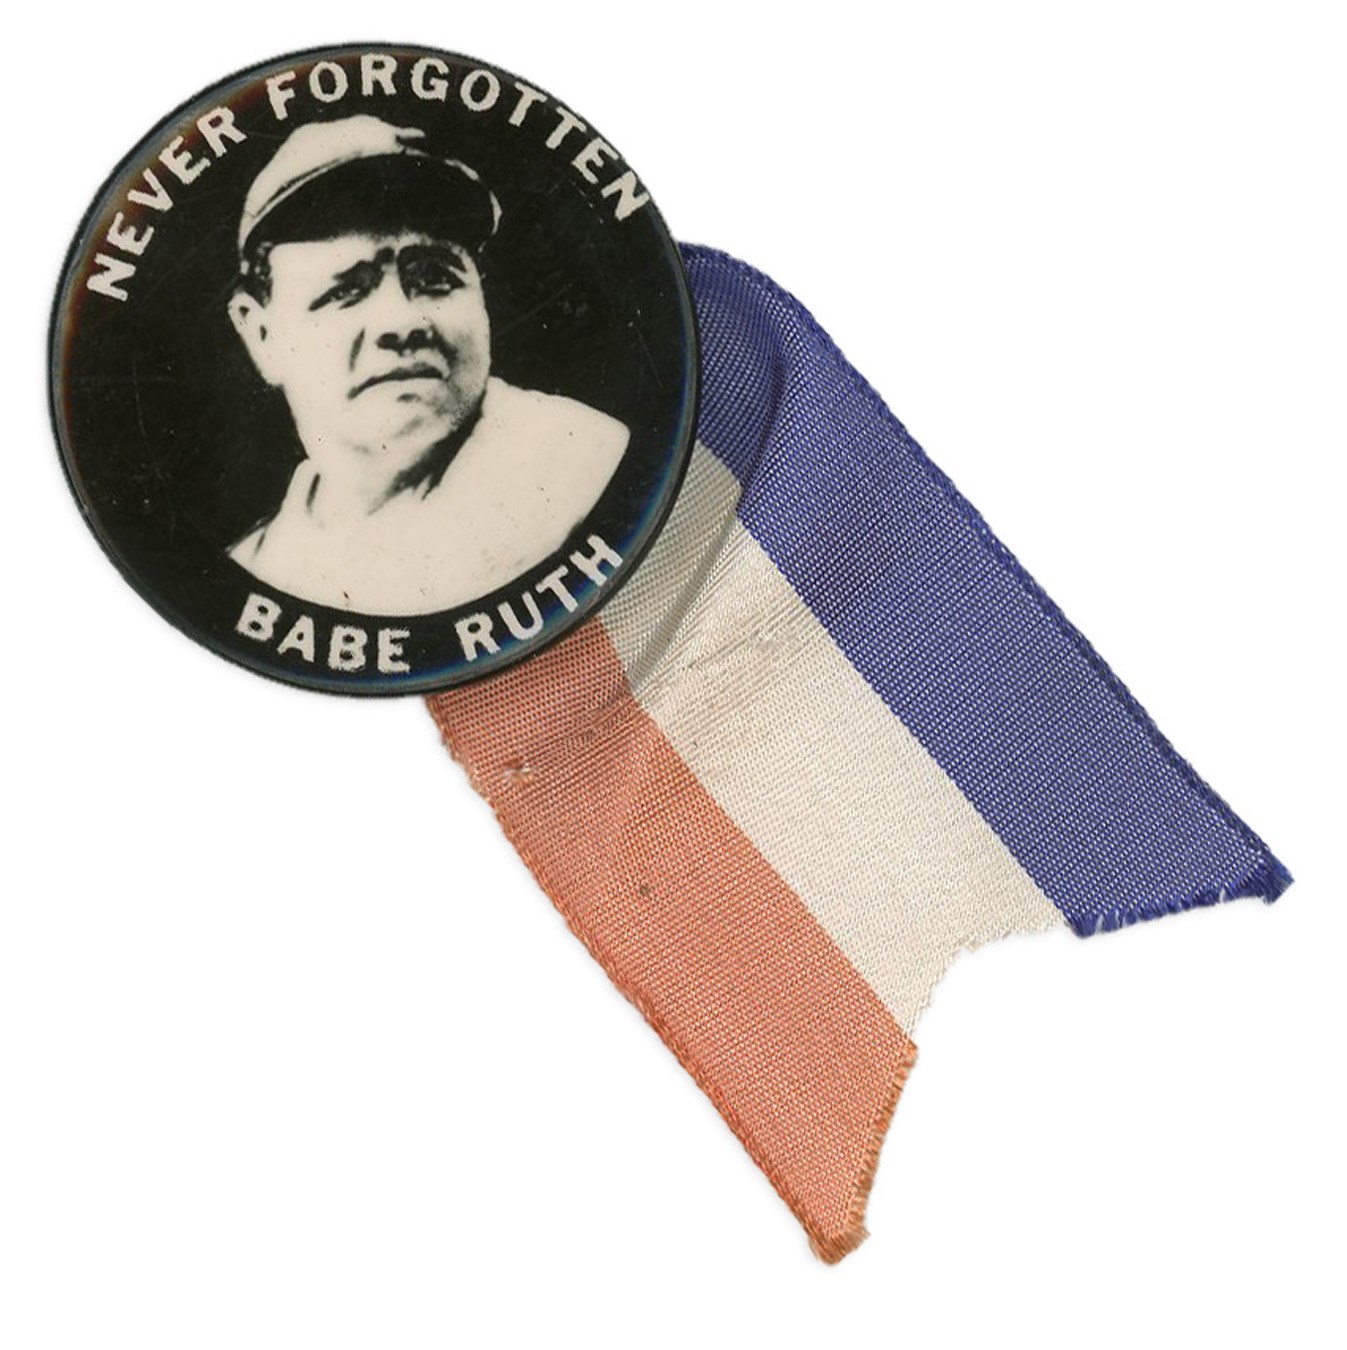 1948 Babe Ruth "Never Forgotten" PM10 Pin